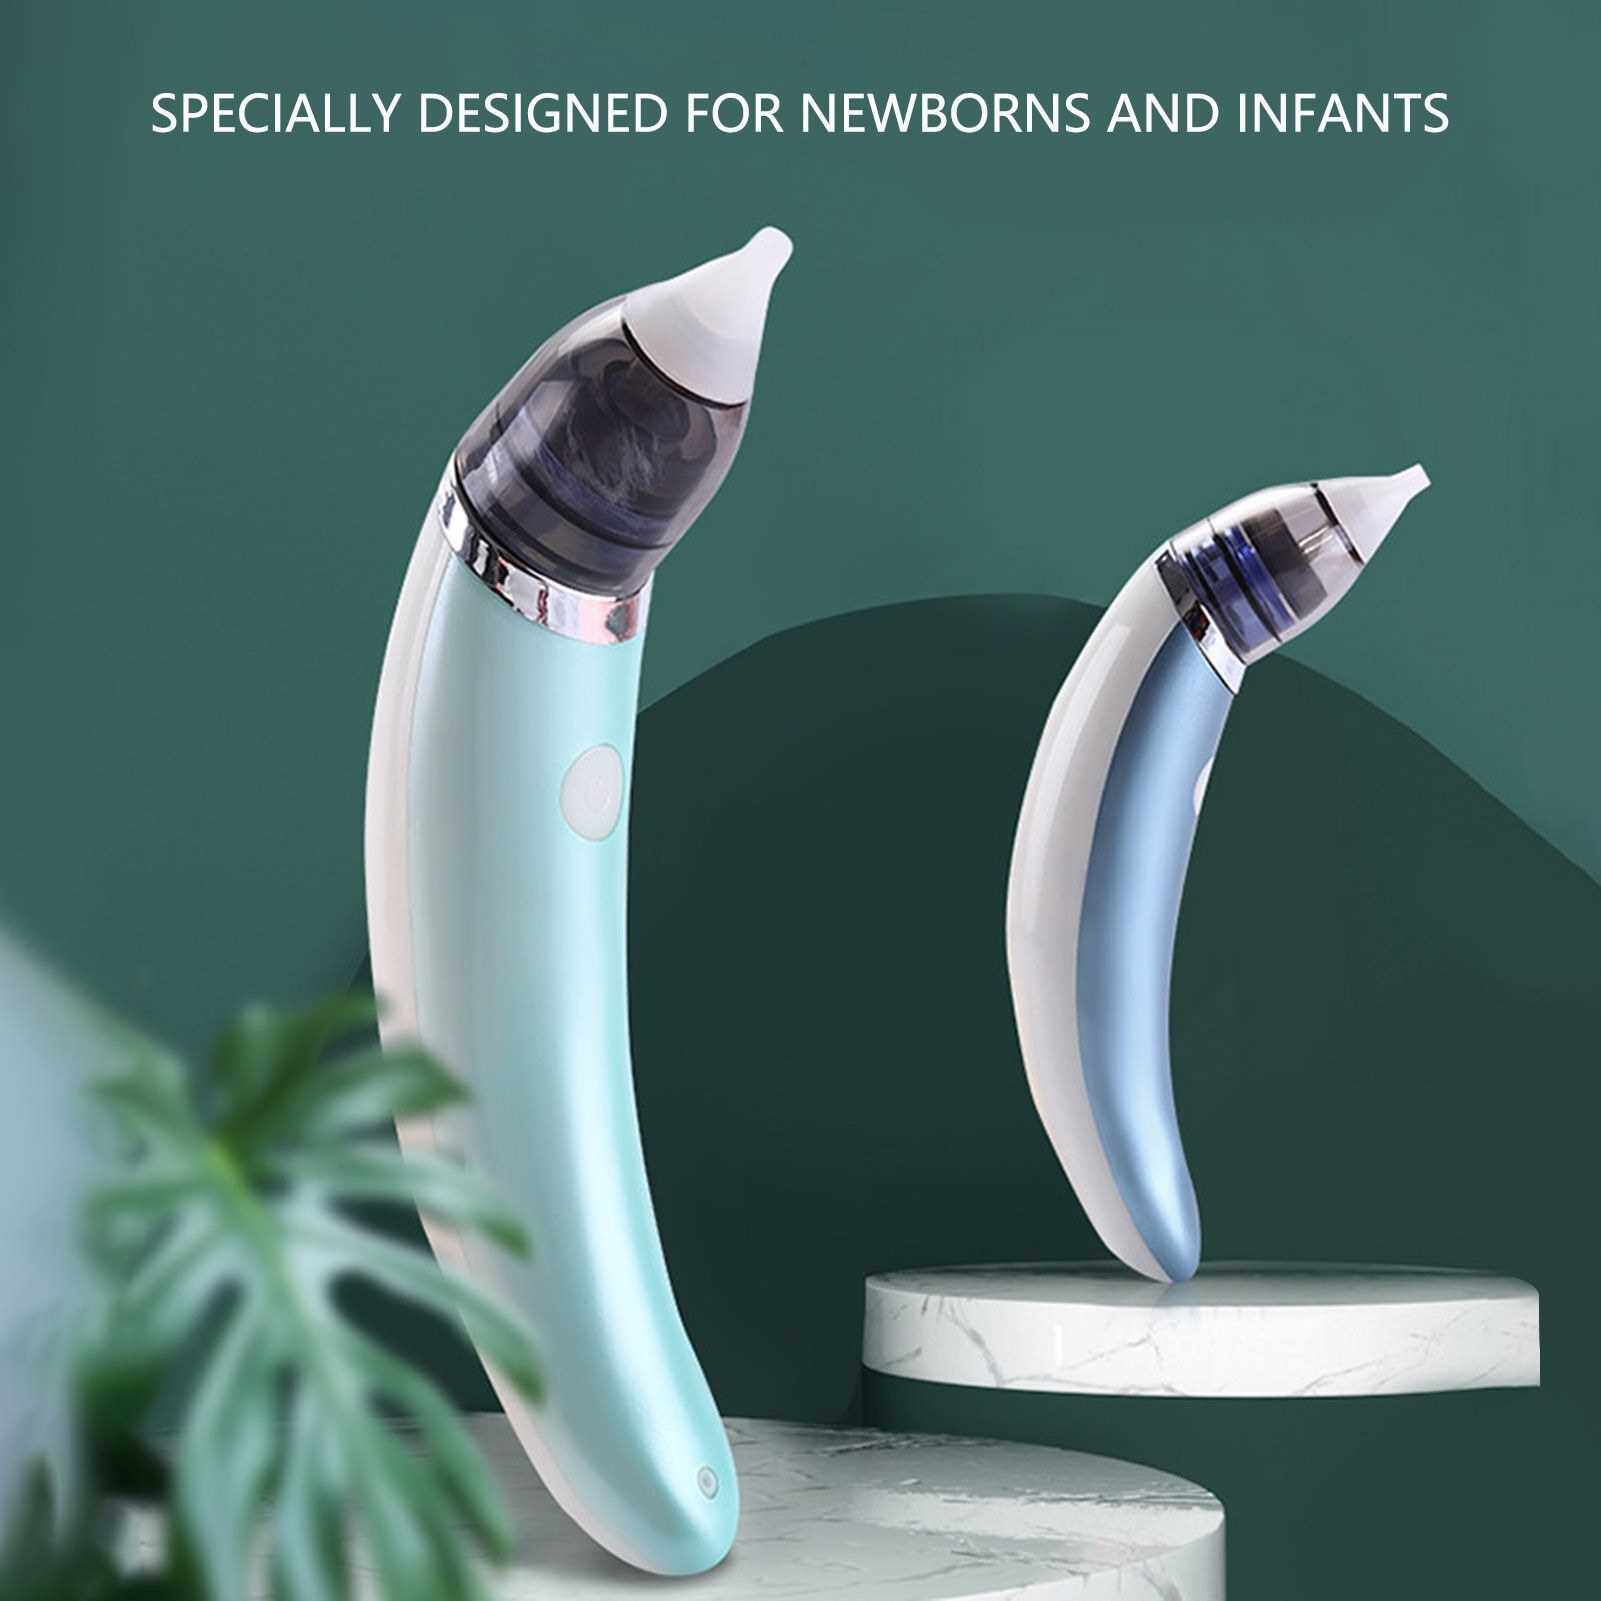 Best Selling Electric Baby Nasal Aspirator, Electric Booger Sucker for Baby,Snot Sucker Nose Mucus Cleaner with 5 Levels of Suction, USB Rechargeable Automatic Booger Remover (Standard)